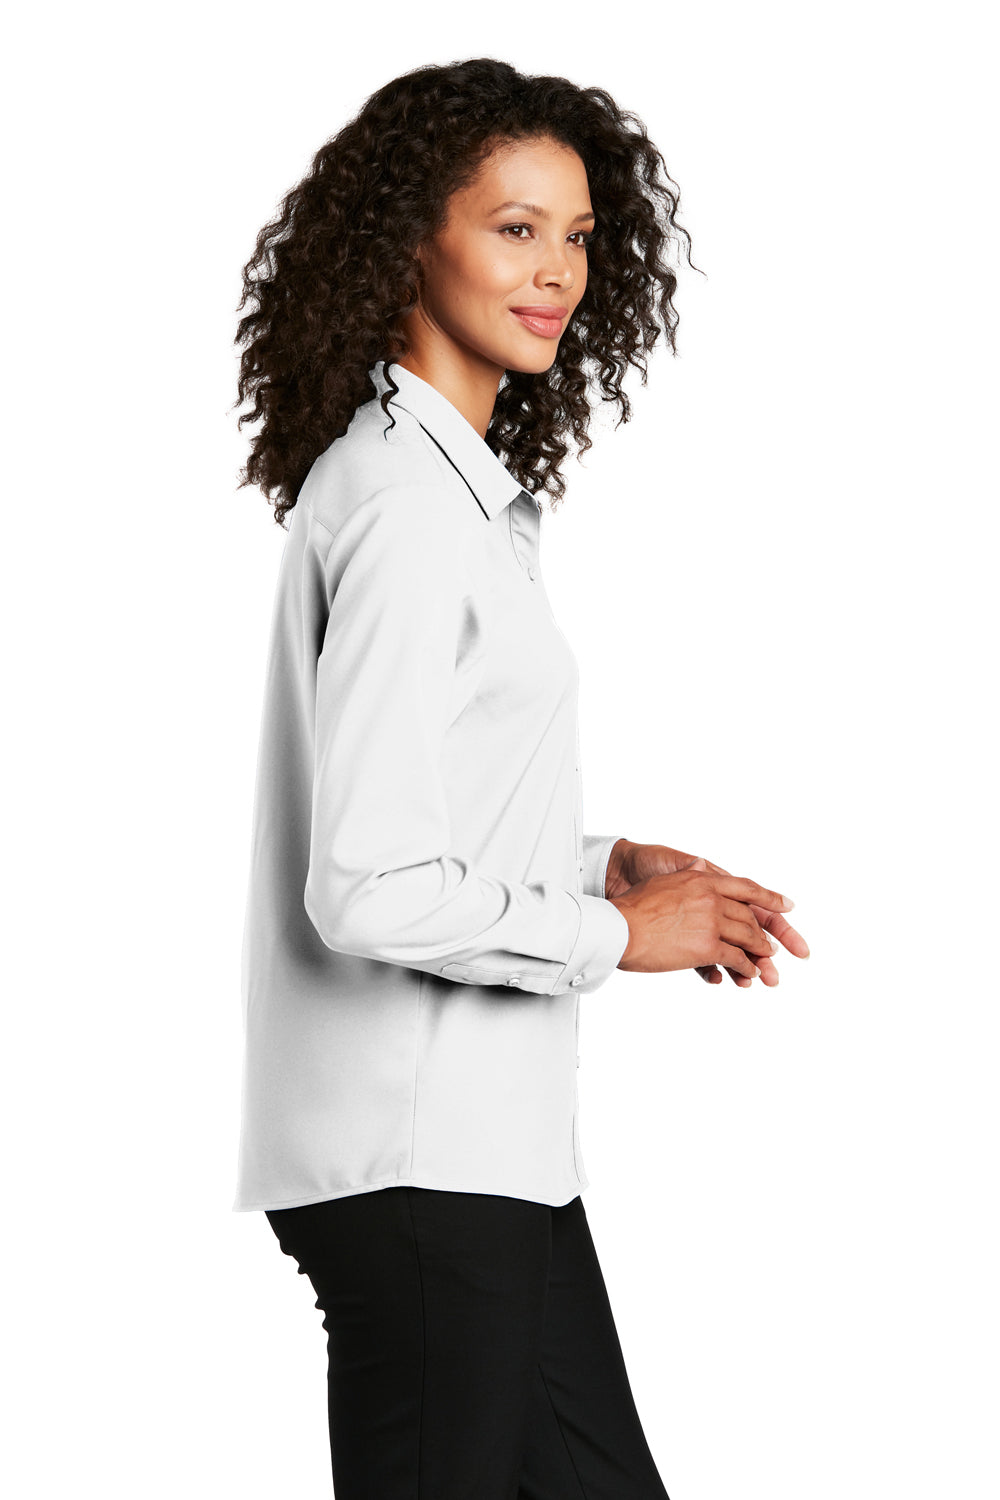 Port Authority Womens Performance Long Sleeve Button Down Shirt White Side